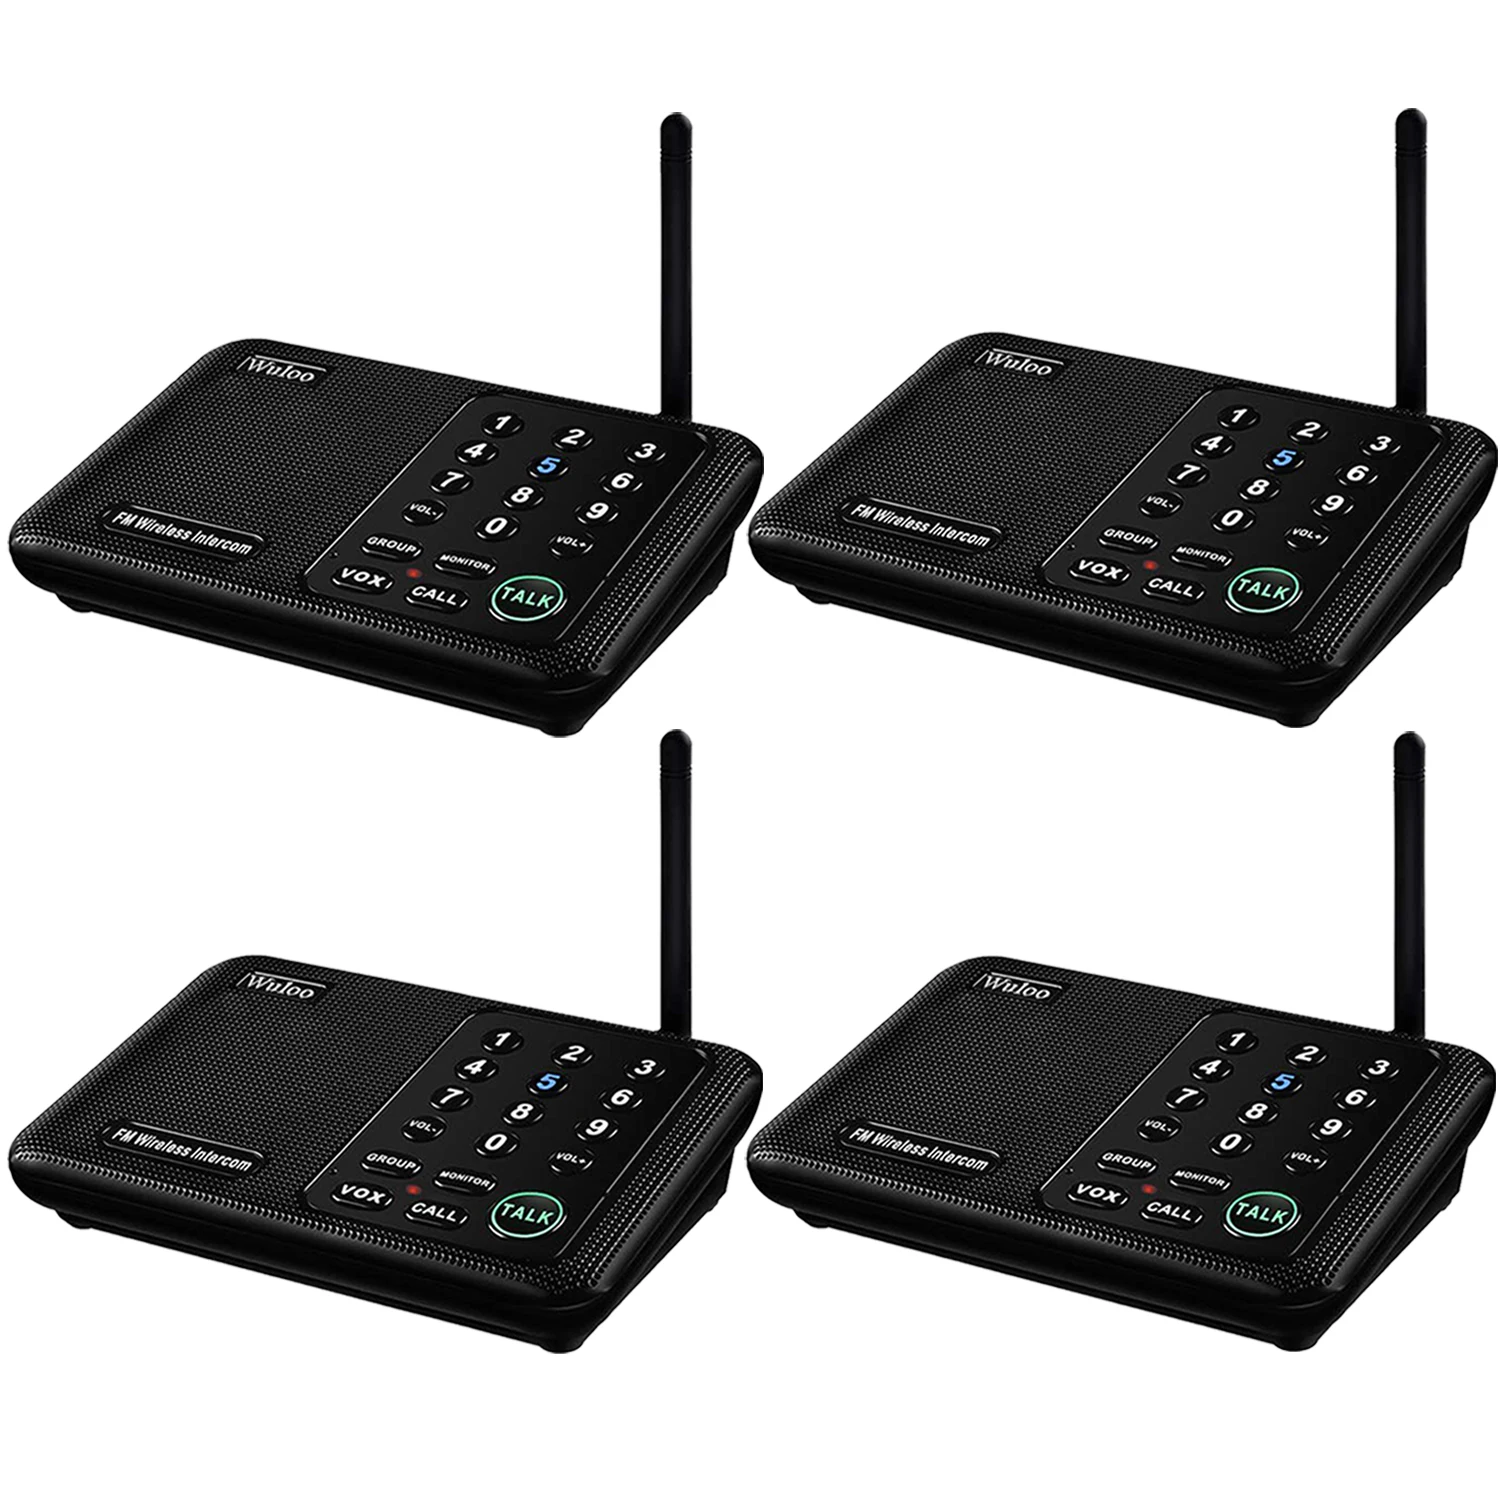 Wuloo 10 Channel Wireless Intercom System for Home House Business Offices 1 Mile Long Range Room to Room Communicate Intercoms